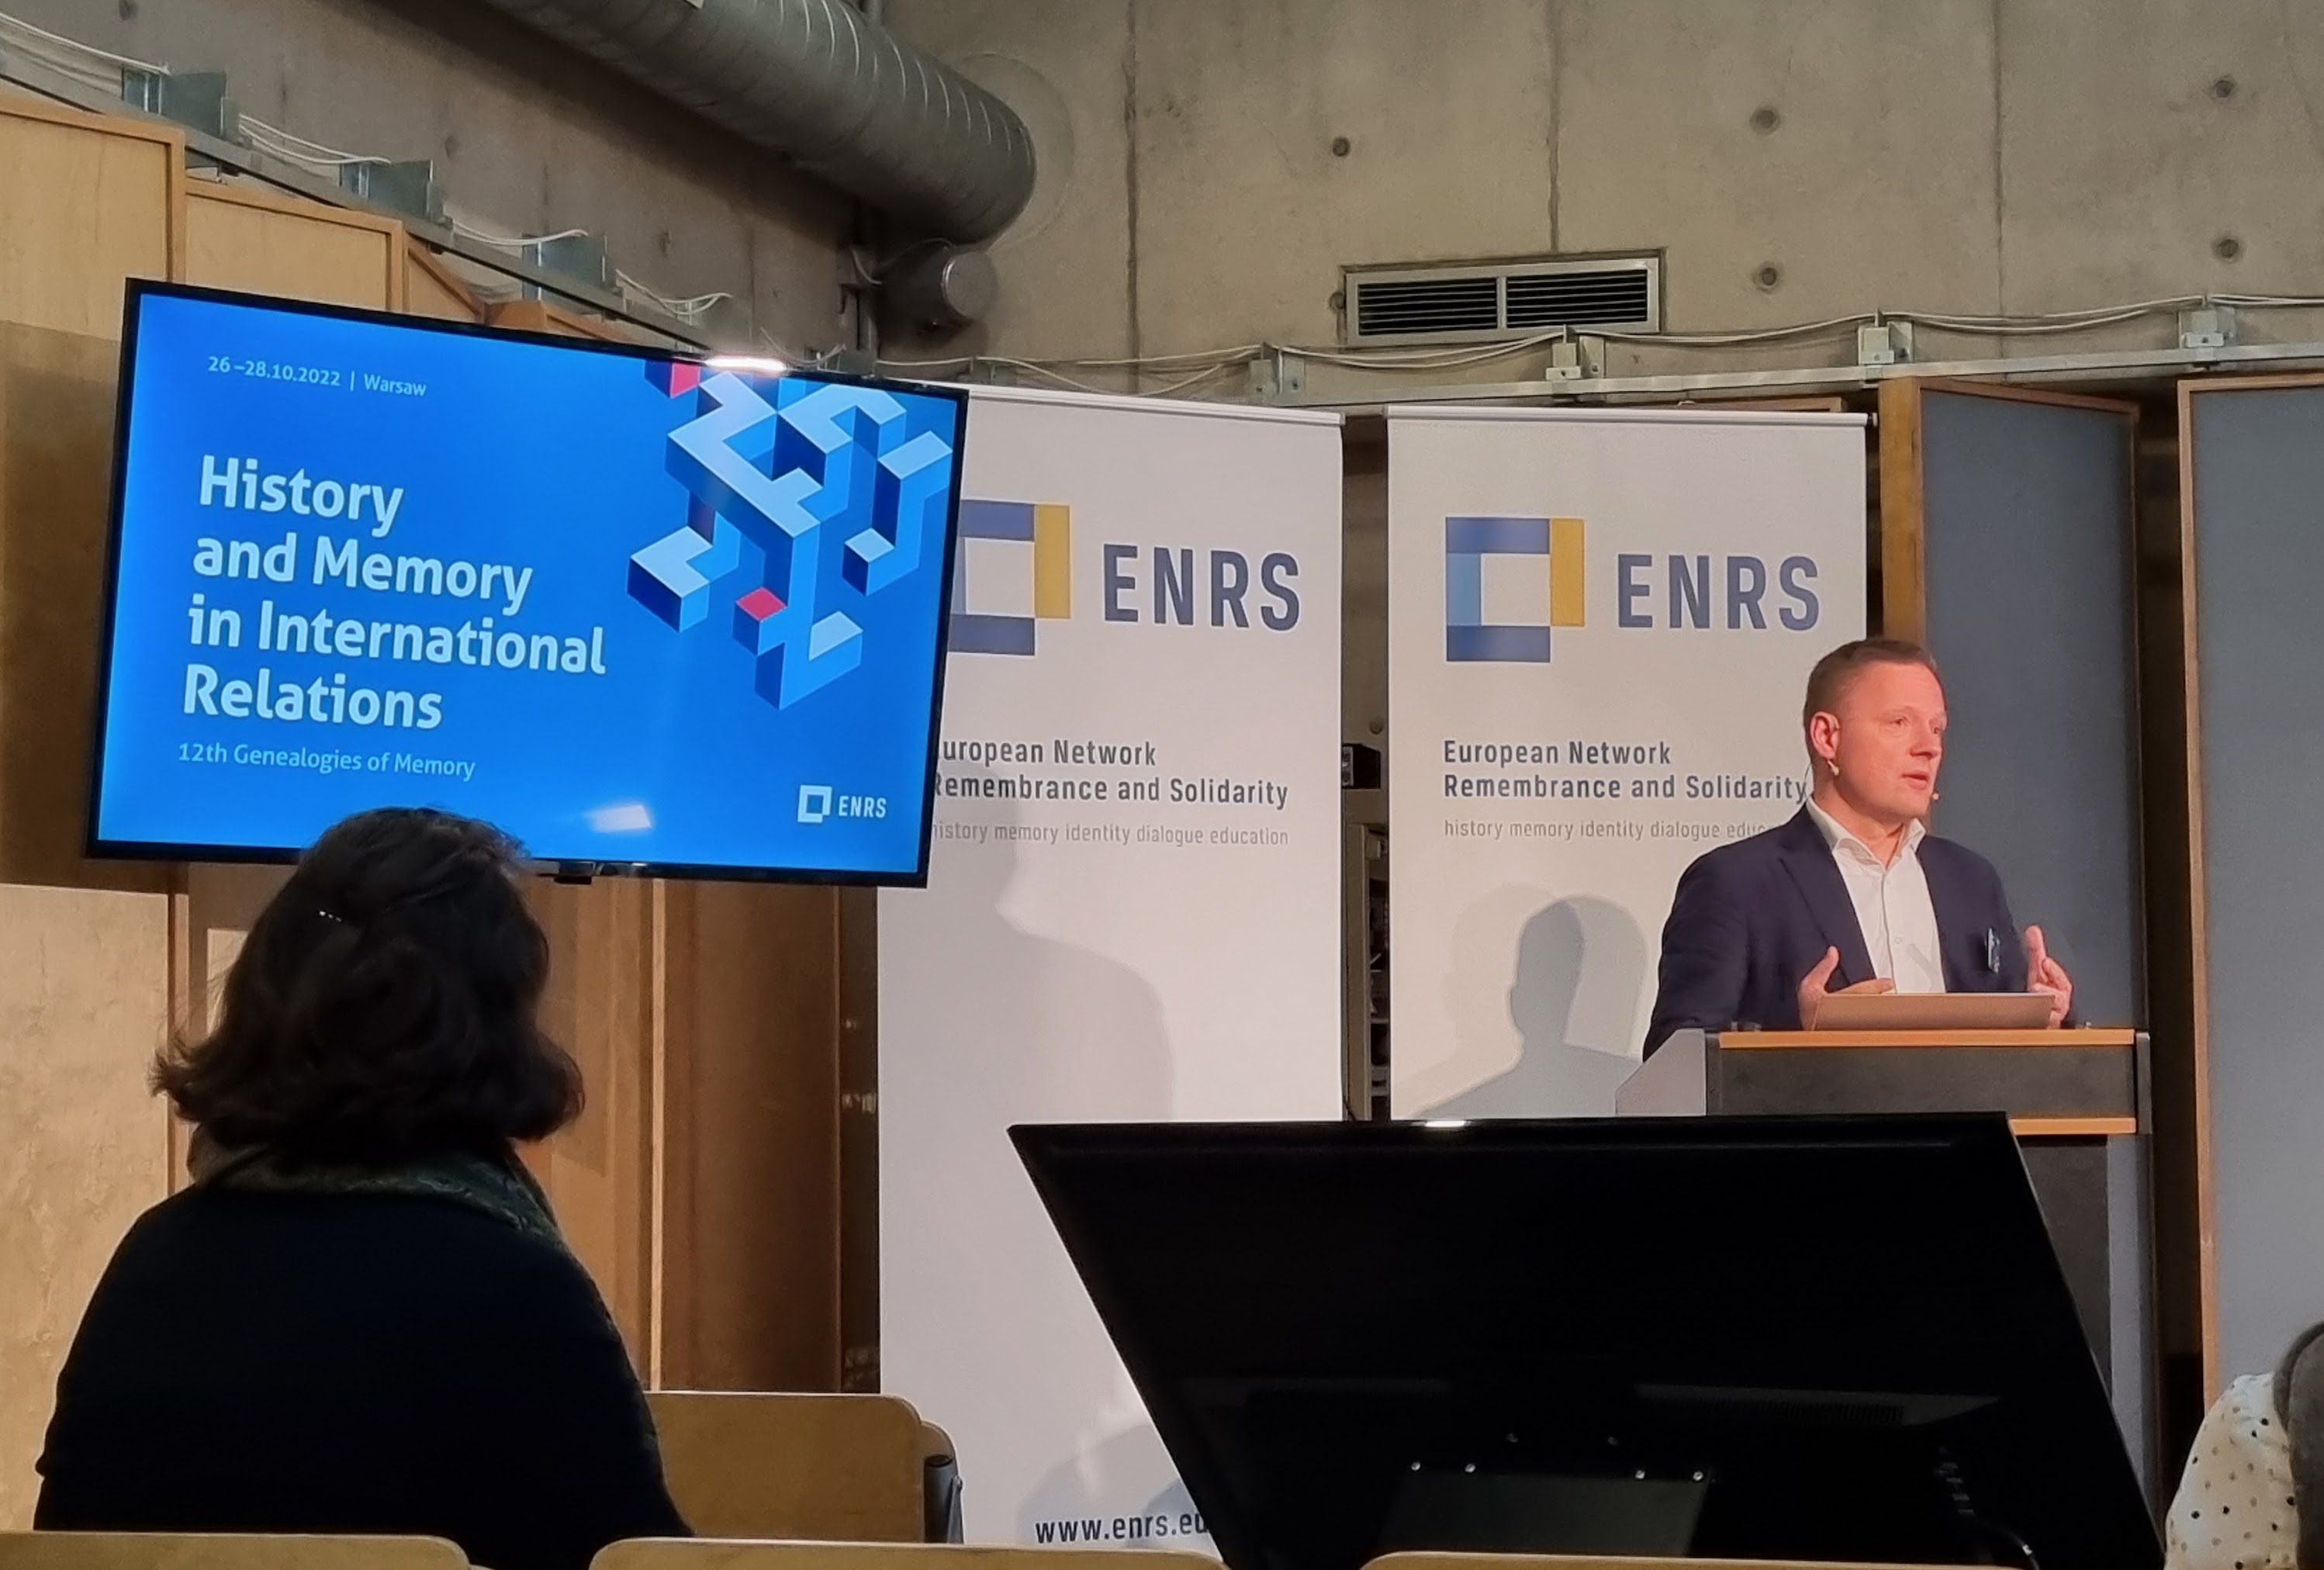 Hans Gutbrod on Twitter "some visual impressions from great enrs_eu